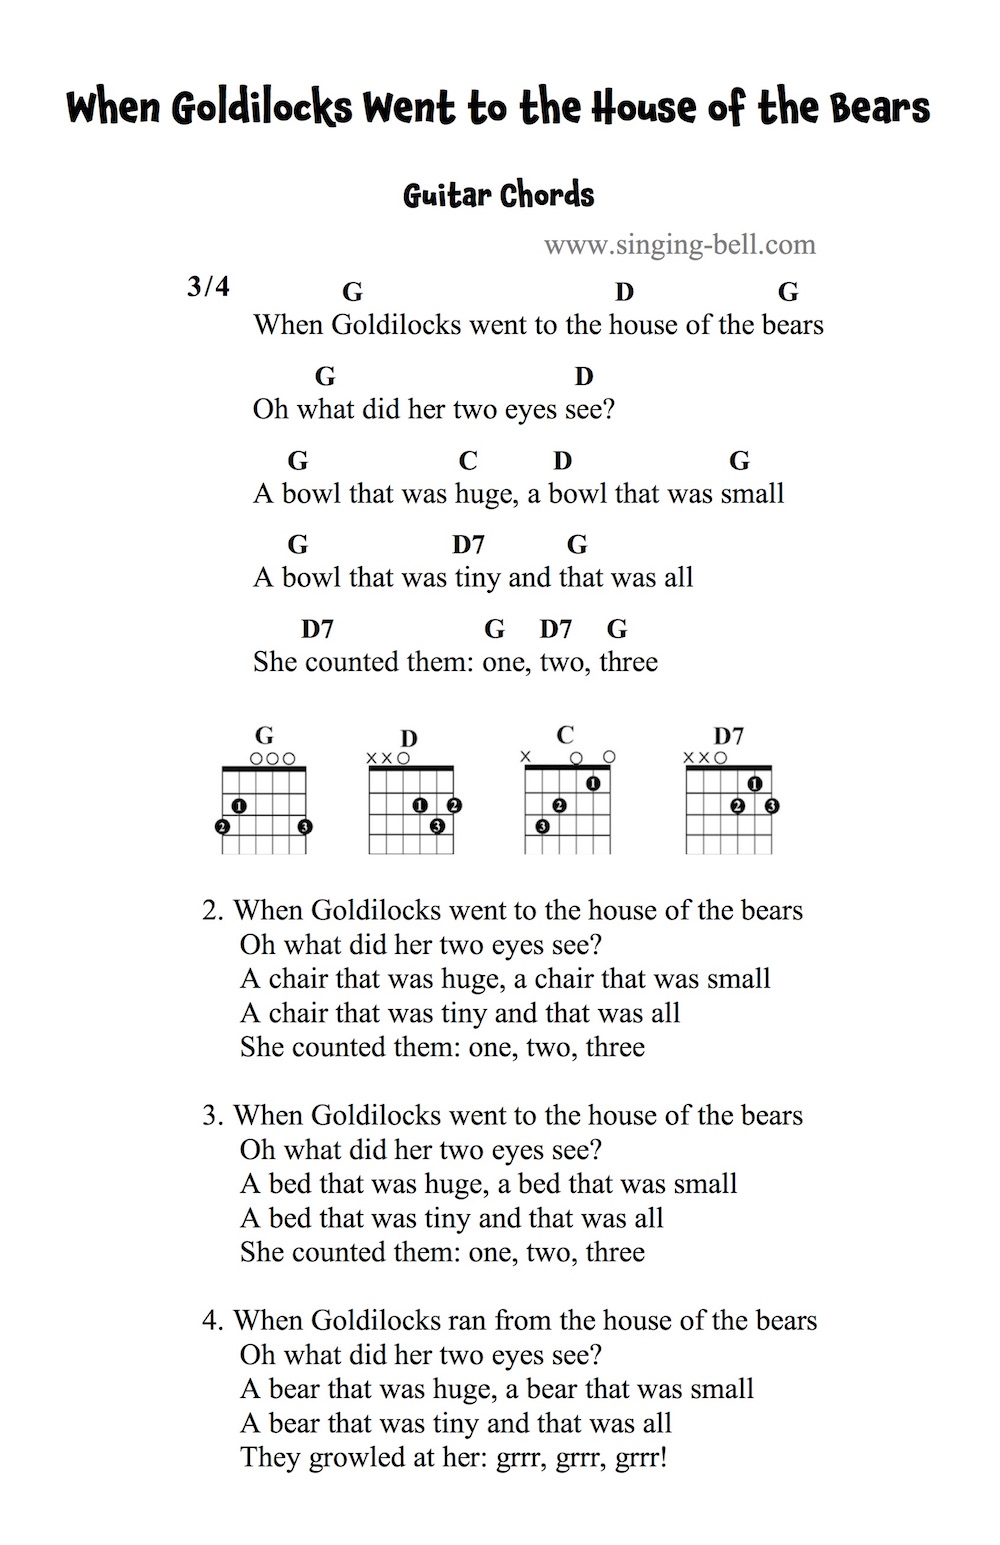 When Goldilocks Went to the House of the Bears Guitar Chords and Tabs.